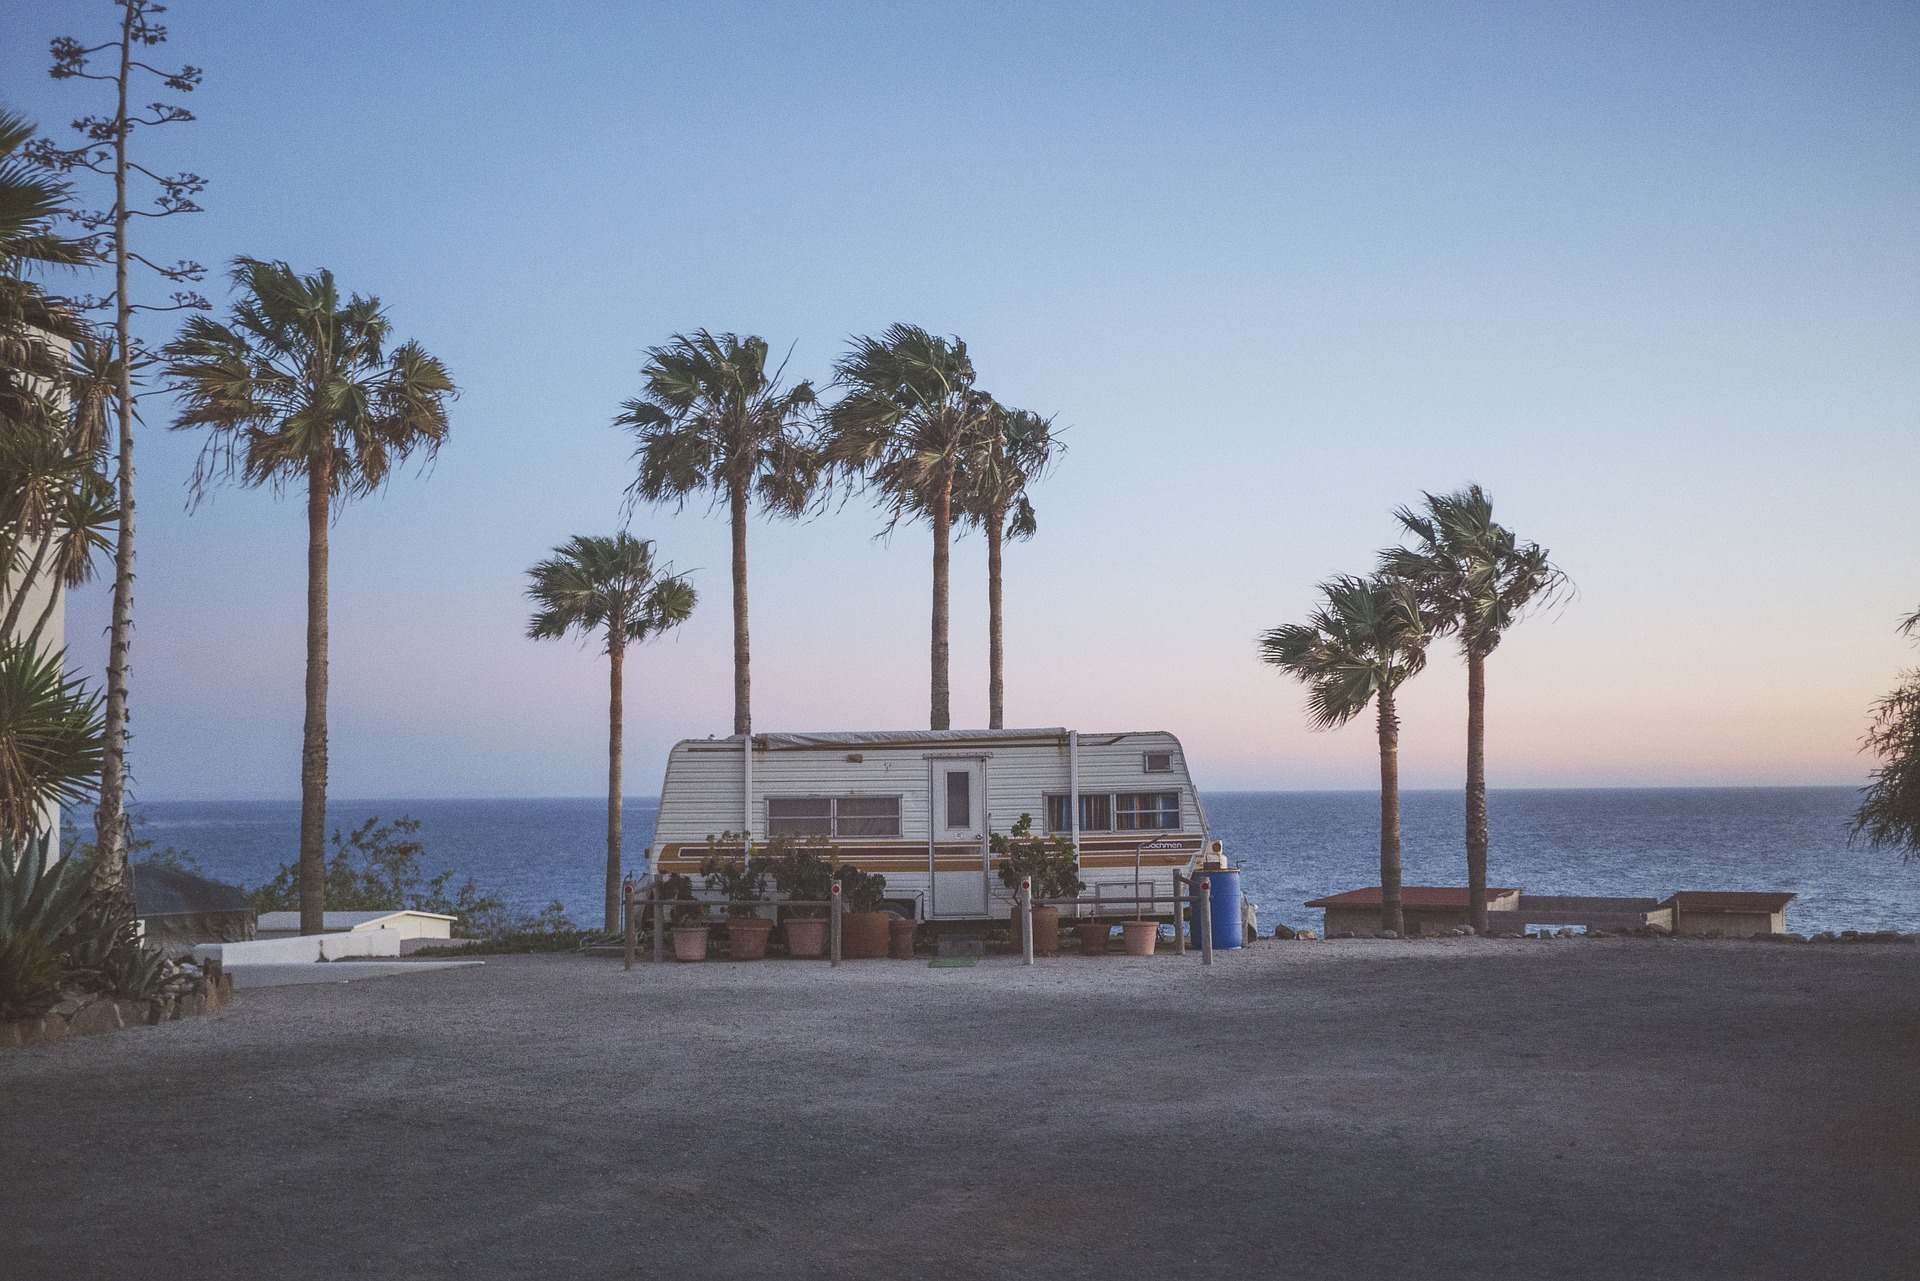 Palm trees bend over a camping trailer on a windy day along the coast.